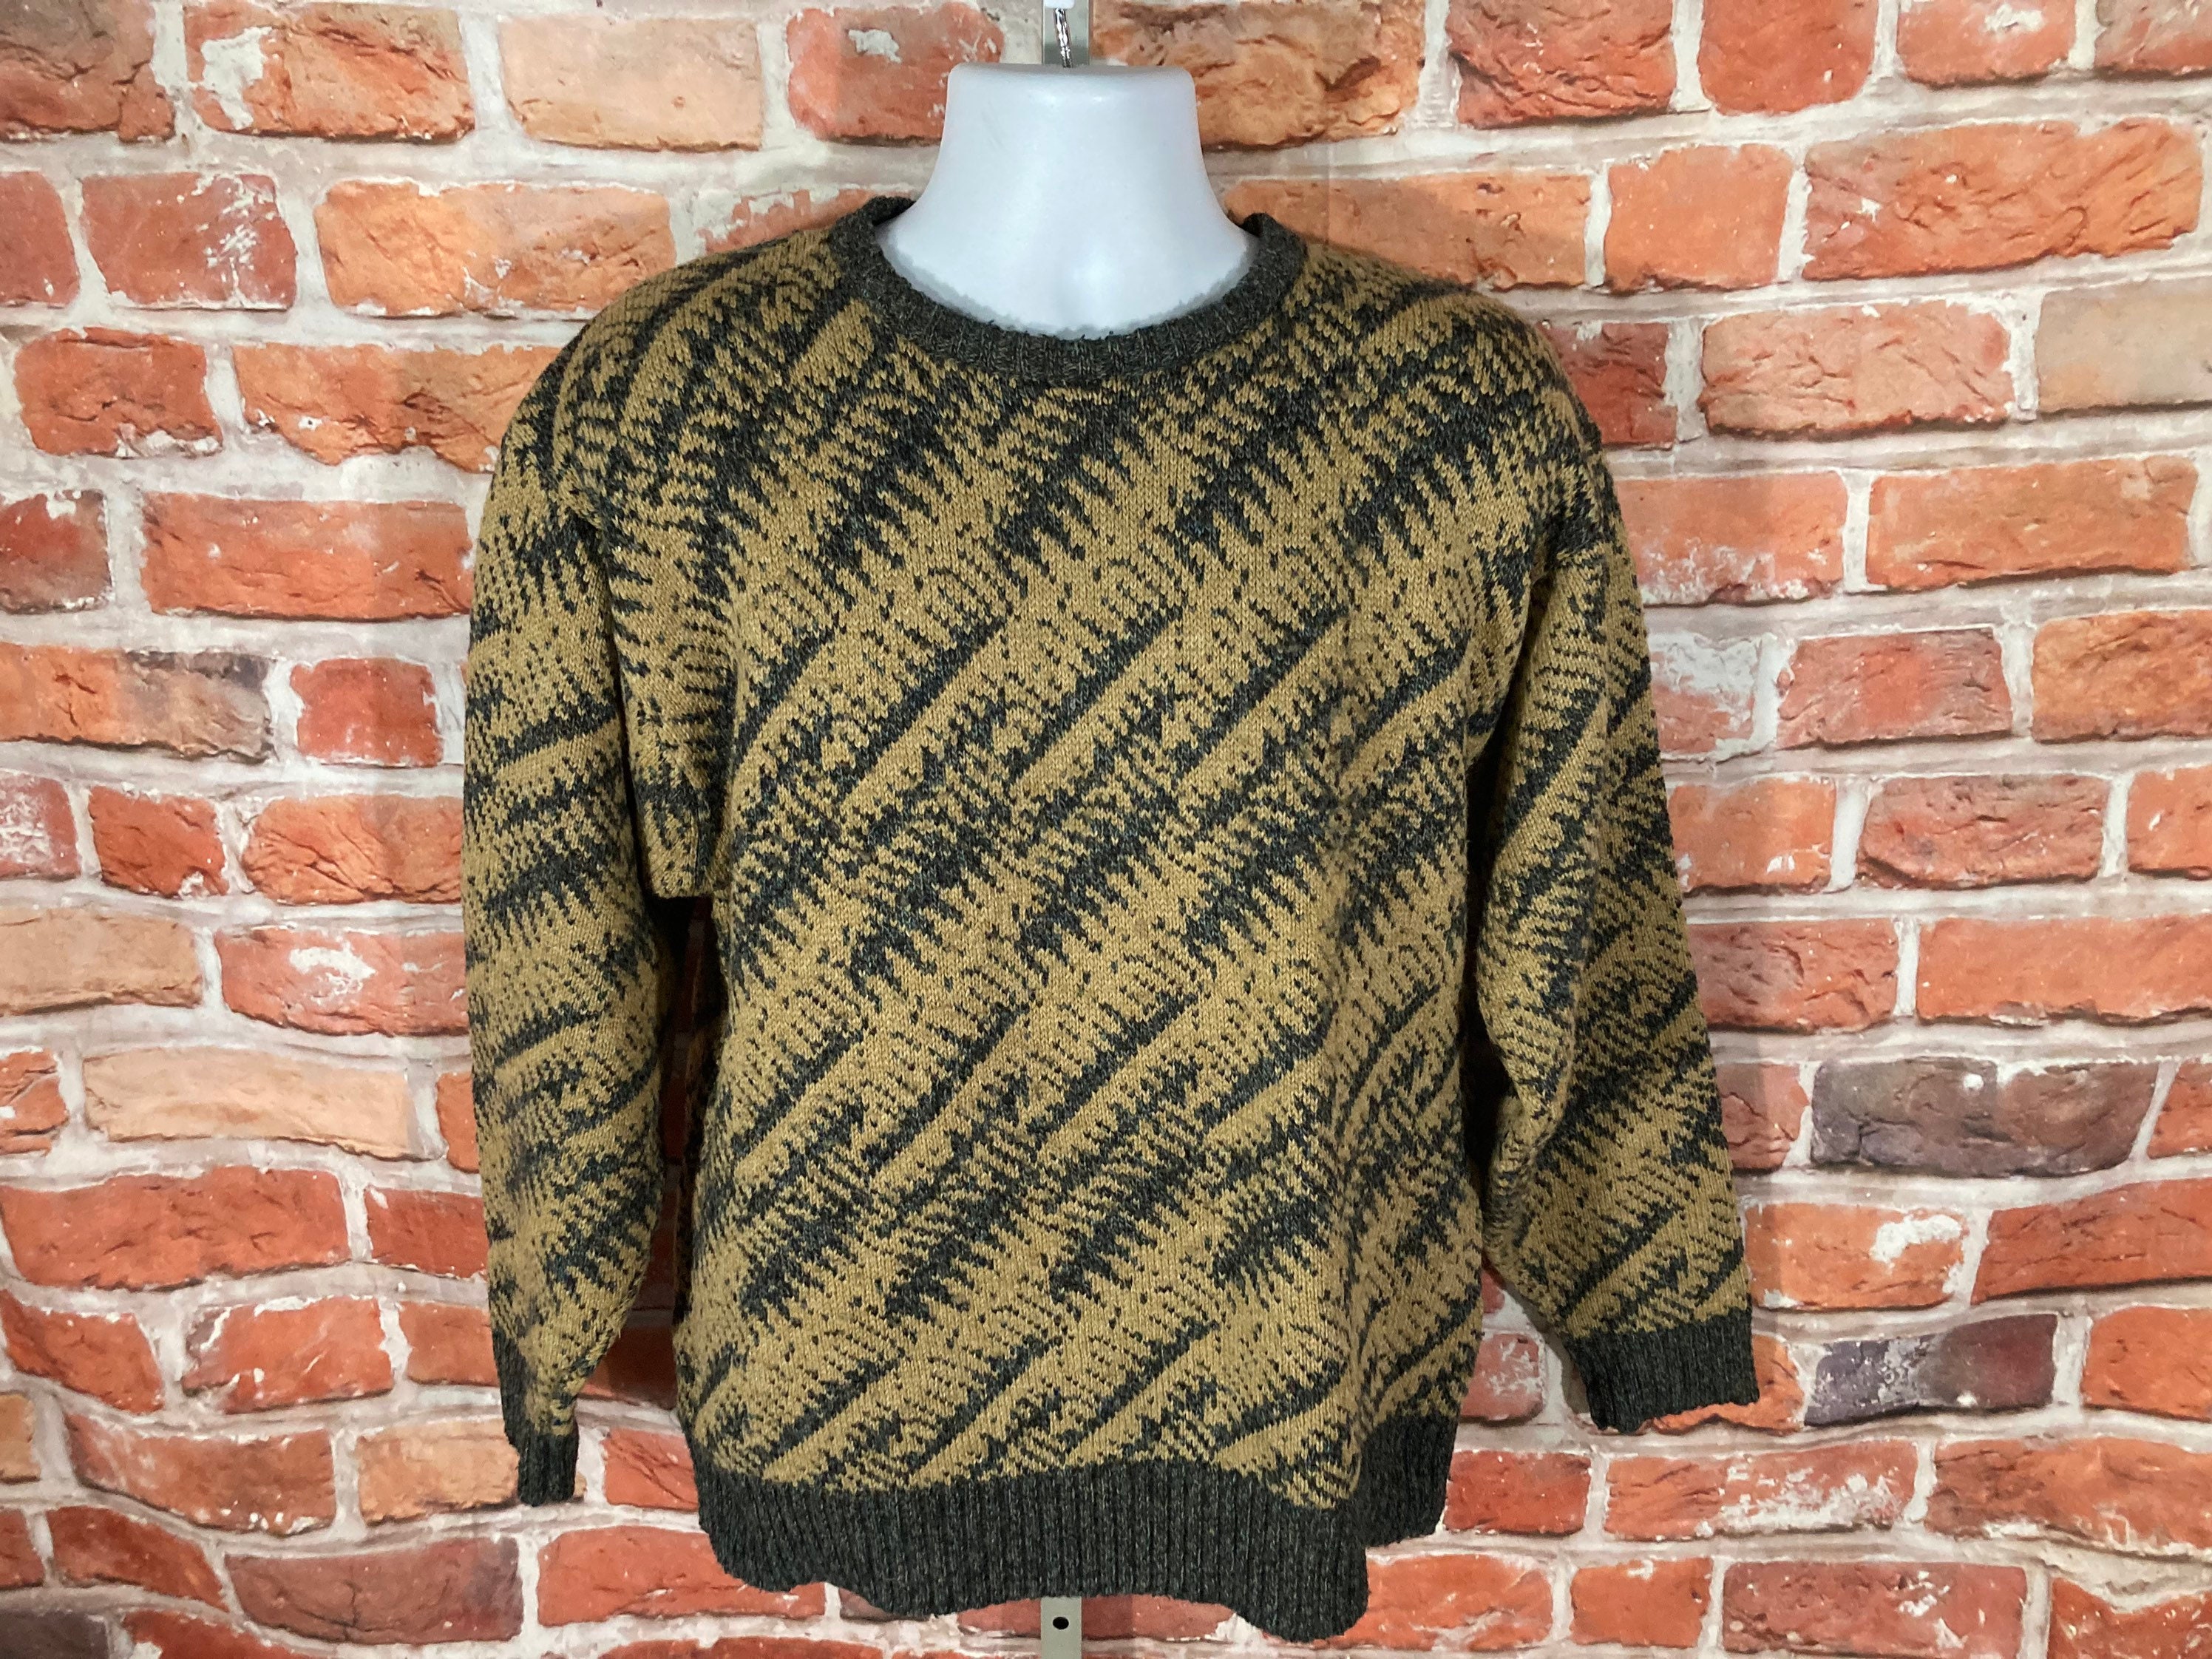 Vintage Wool Blend Striped Abstract Sweater - Sz L 80S 90S Indie Grunge Cosby